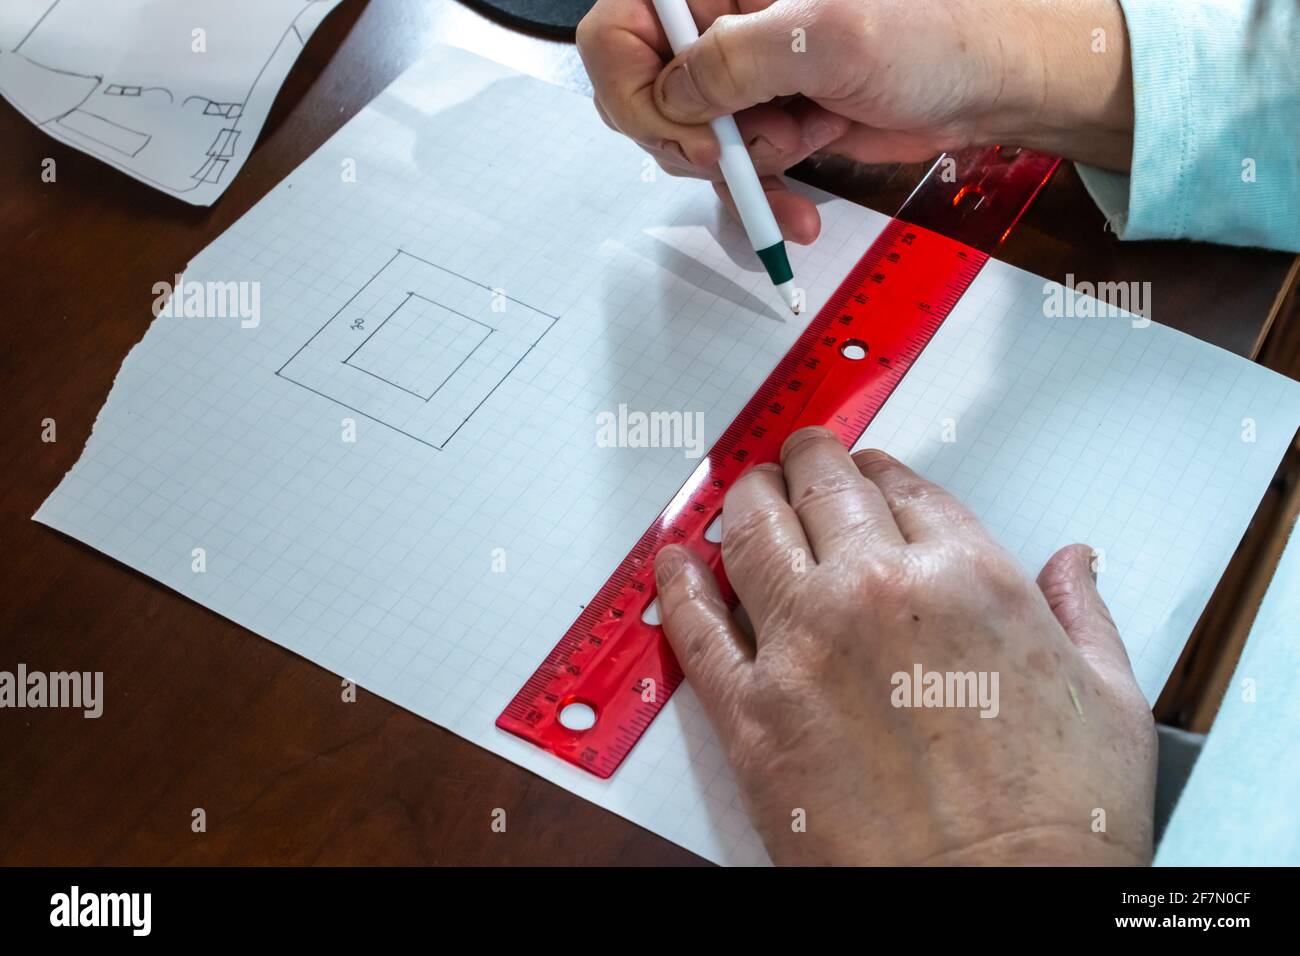 A woman uses a pen to count measurements and sketch out a floor plan for a house on square graph paper using a clear red ruler on hardwood desk. Stock Photo